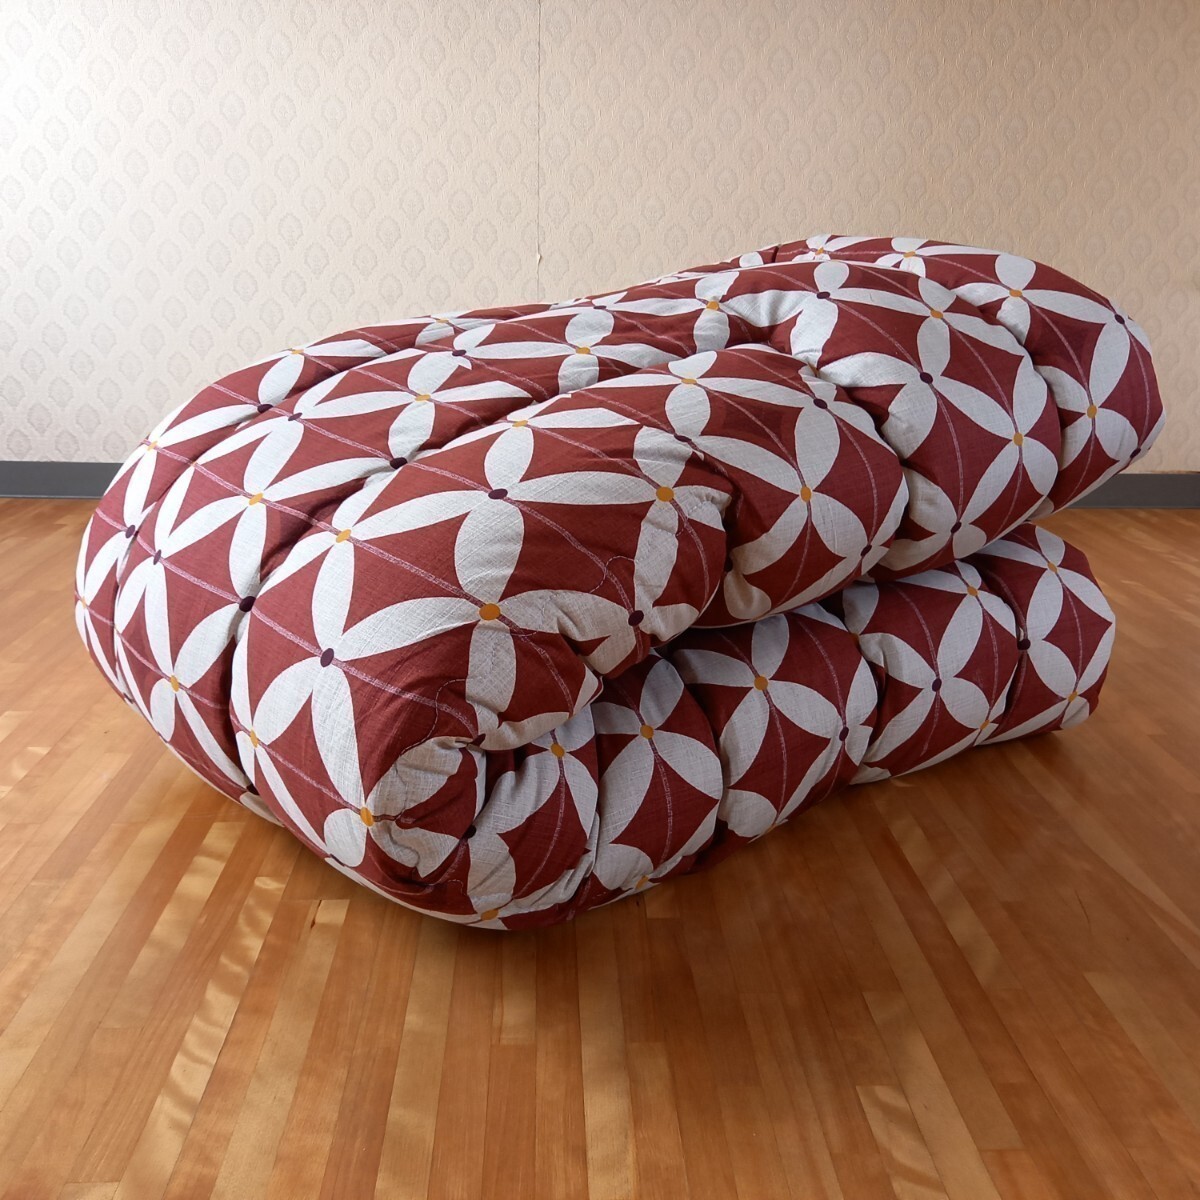  change woven large size rectangle thickness .. kotatsu futon cotton 100% car n tongue clean safety made in Japan old capital. manner A( feather futon quilt futon mattress pillow ) etc. exhibiting..